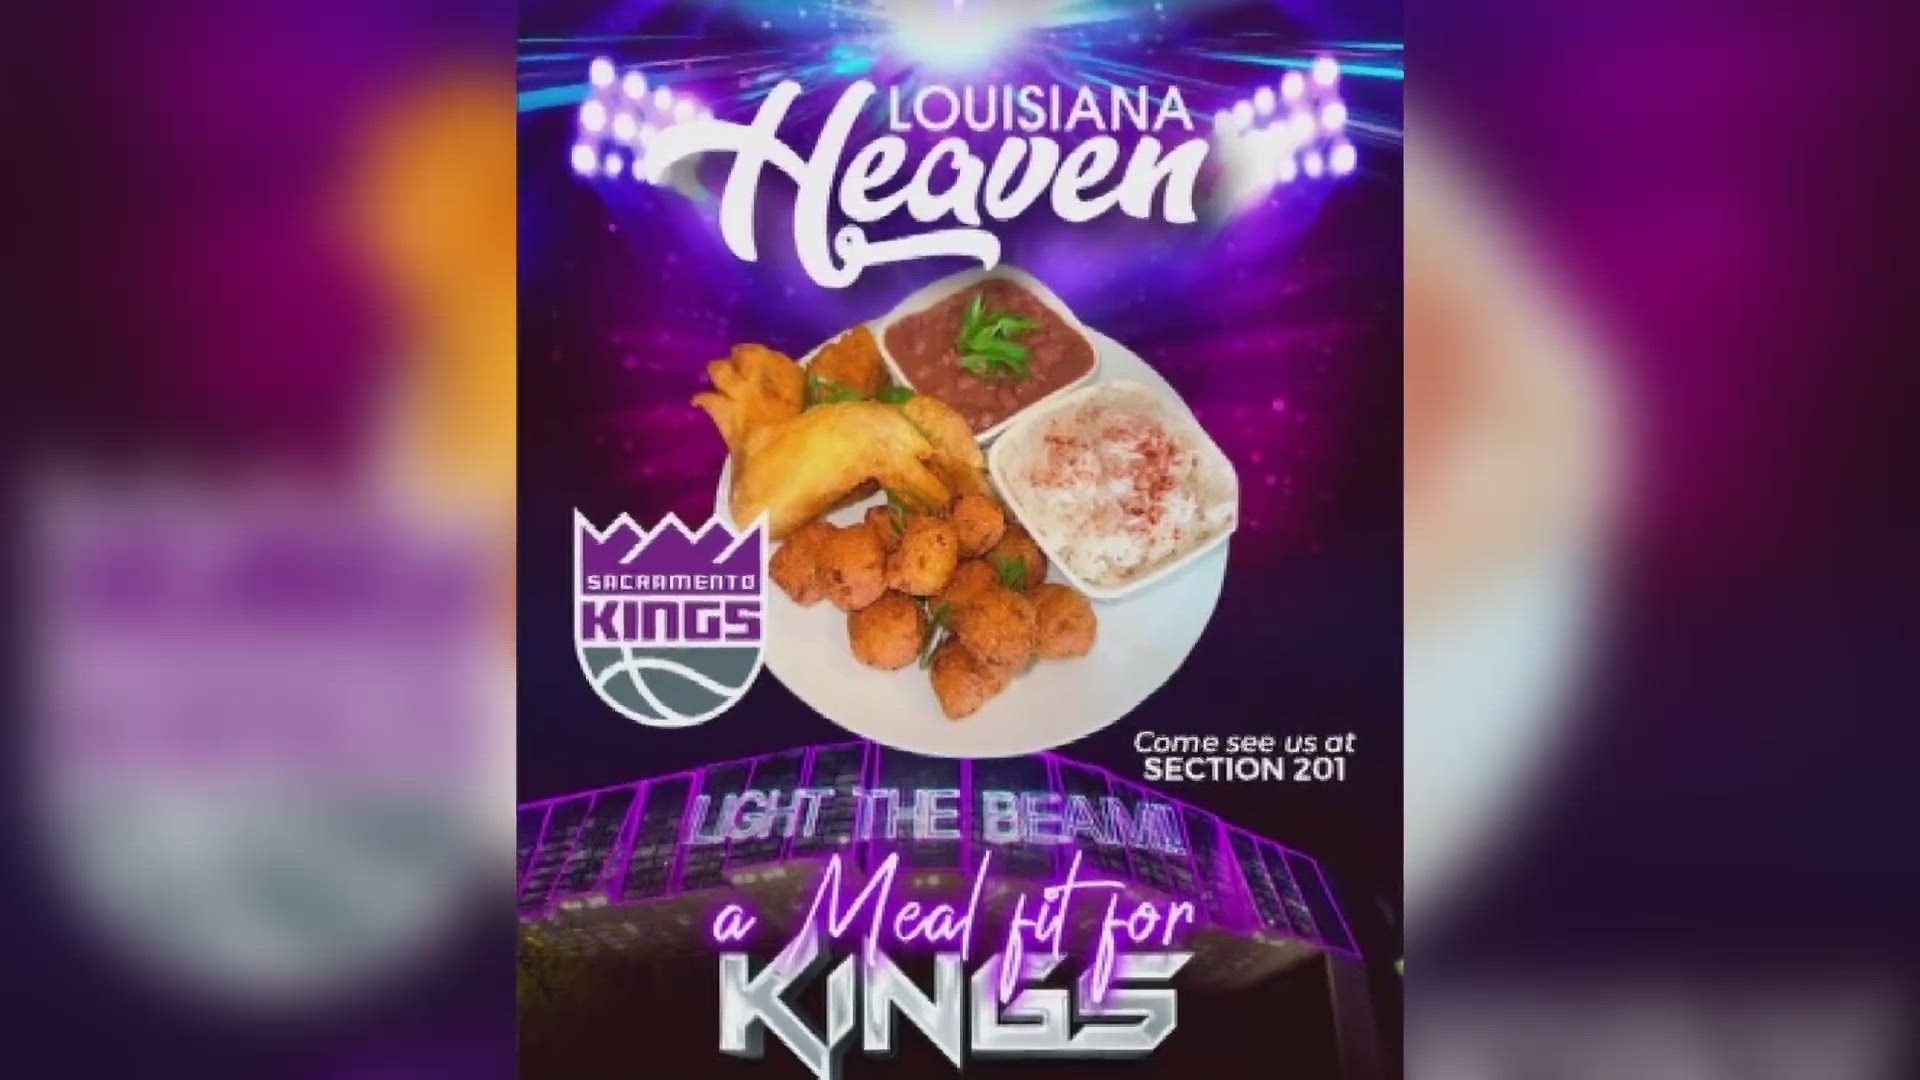 Louisiana Heaven in South Sacramento is officially the first Black-owned restaurant to serve food at Golden One Center during the NBA playoffs.